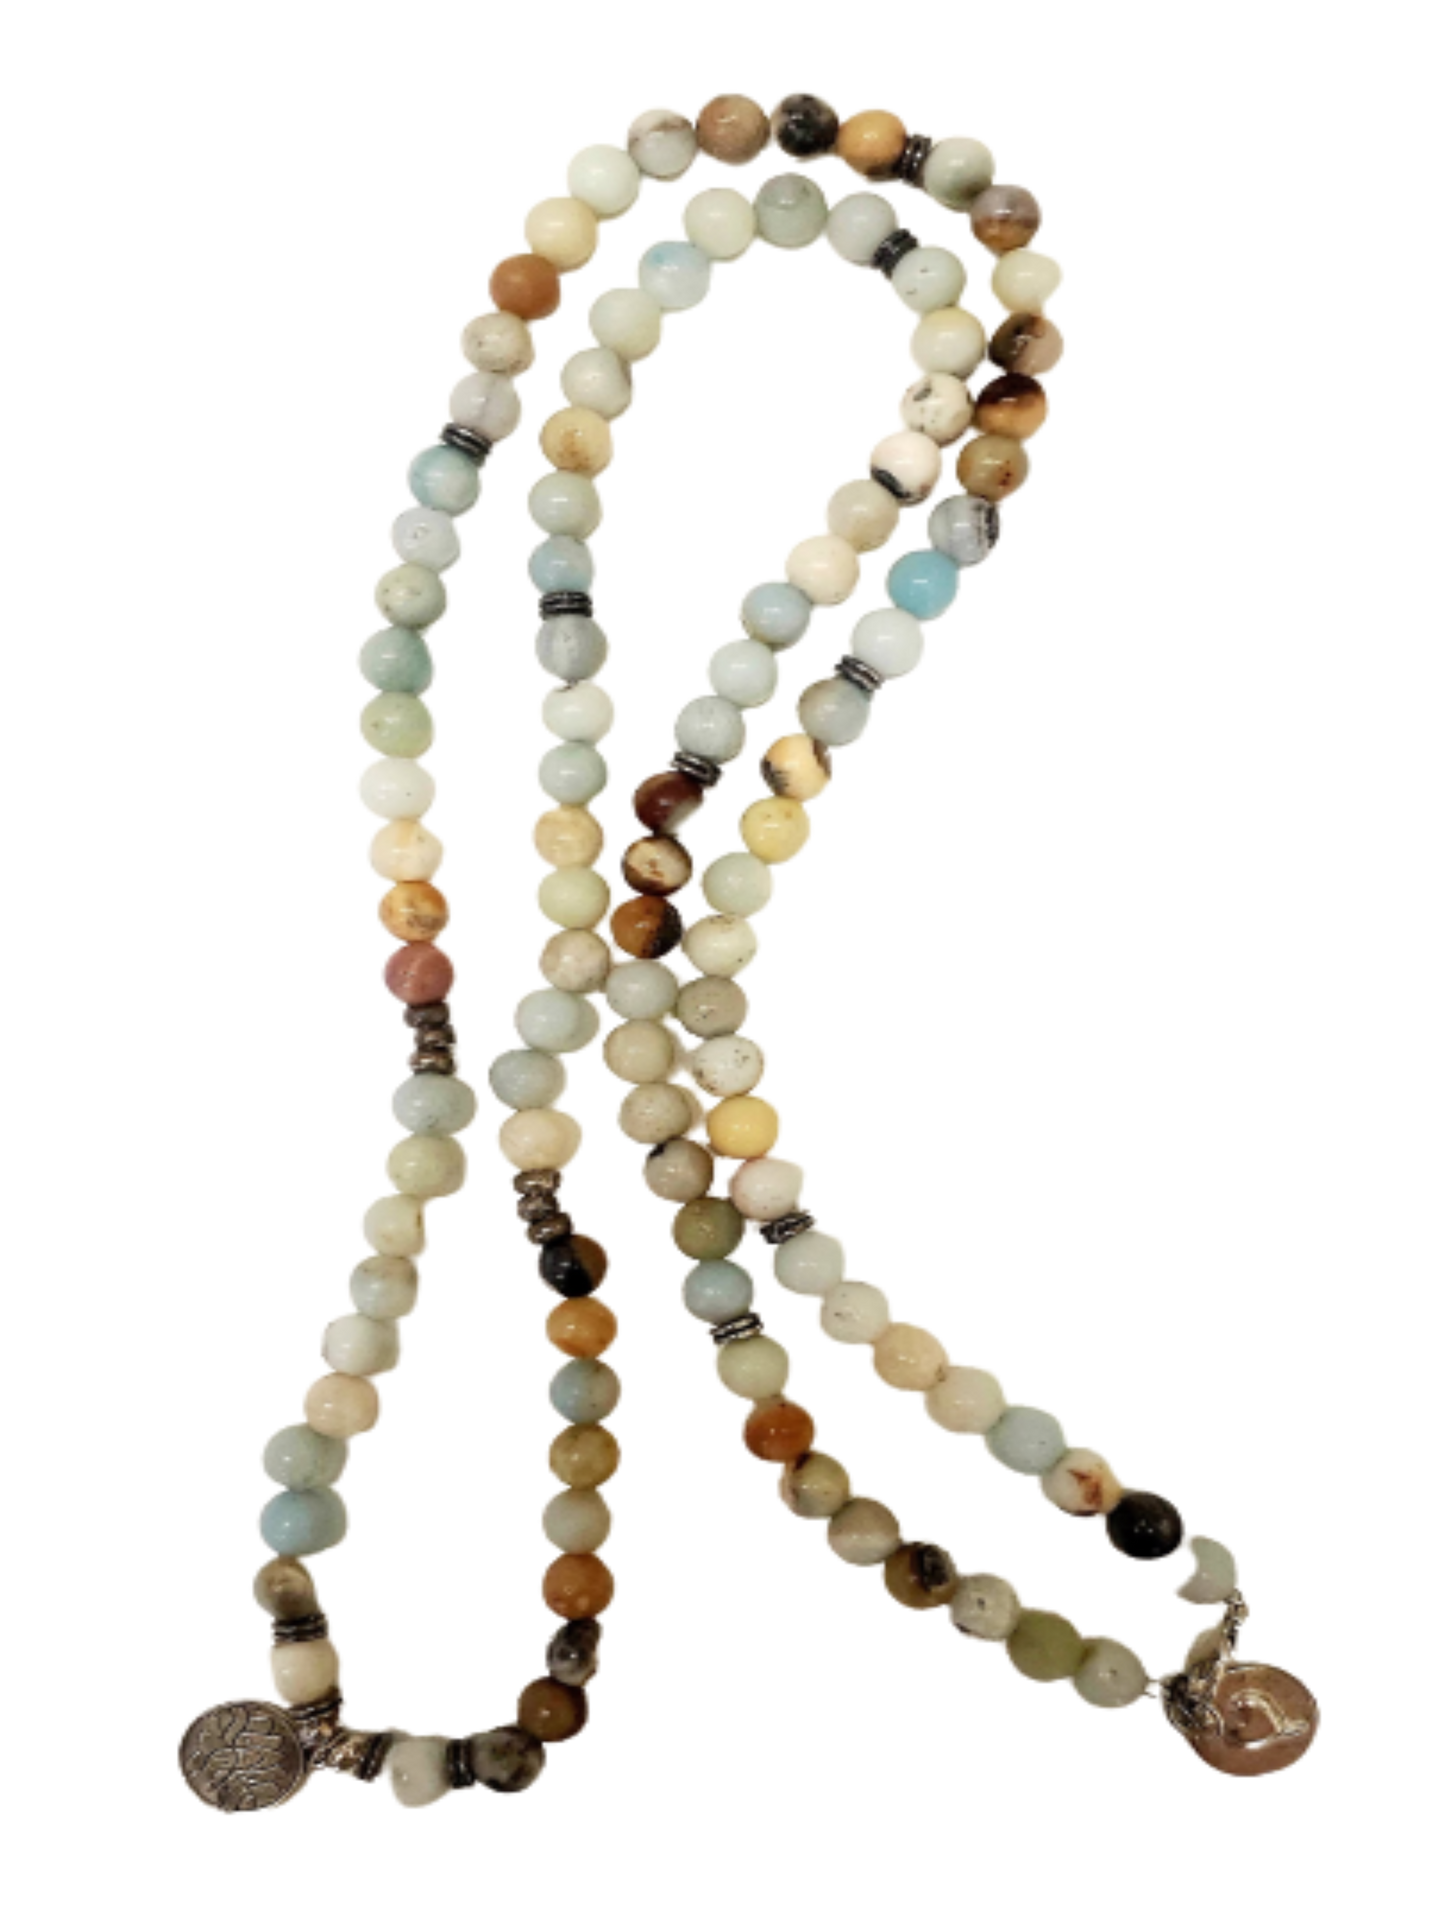 Colors Of The Earth - Beaded Amazonite Necklace